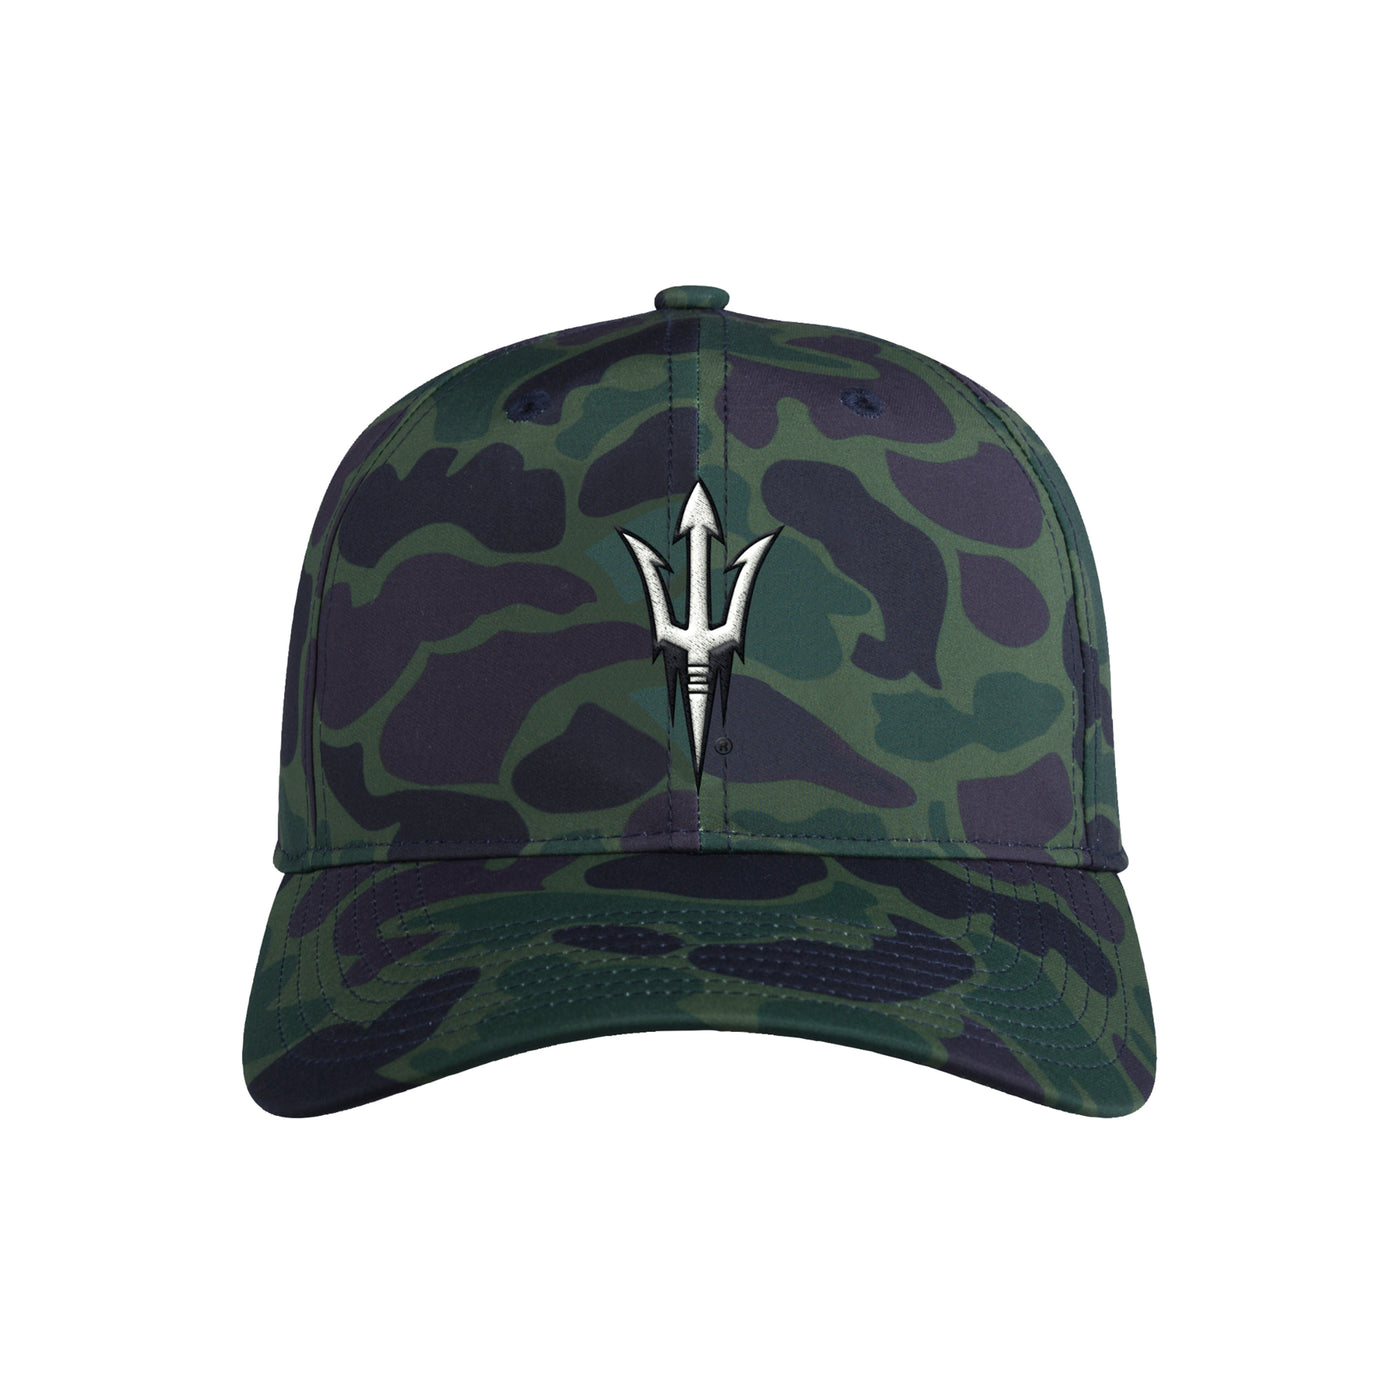 ASU green camo hat with a white pitchfork in the middle